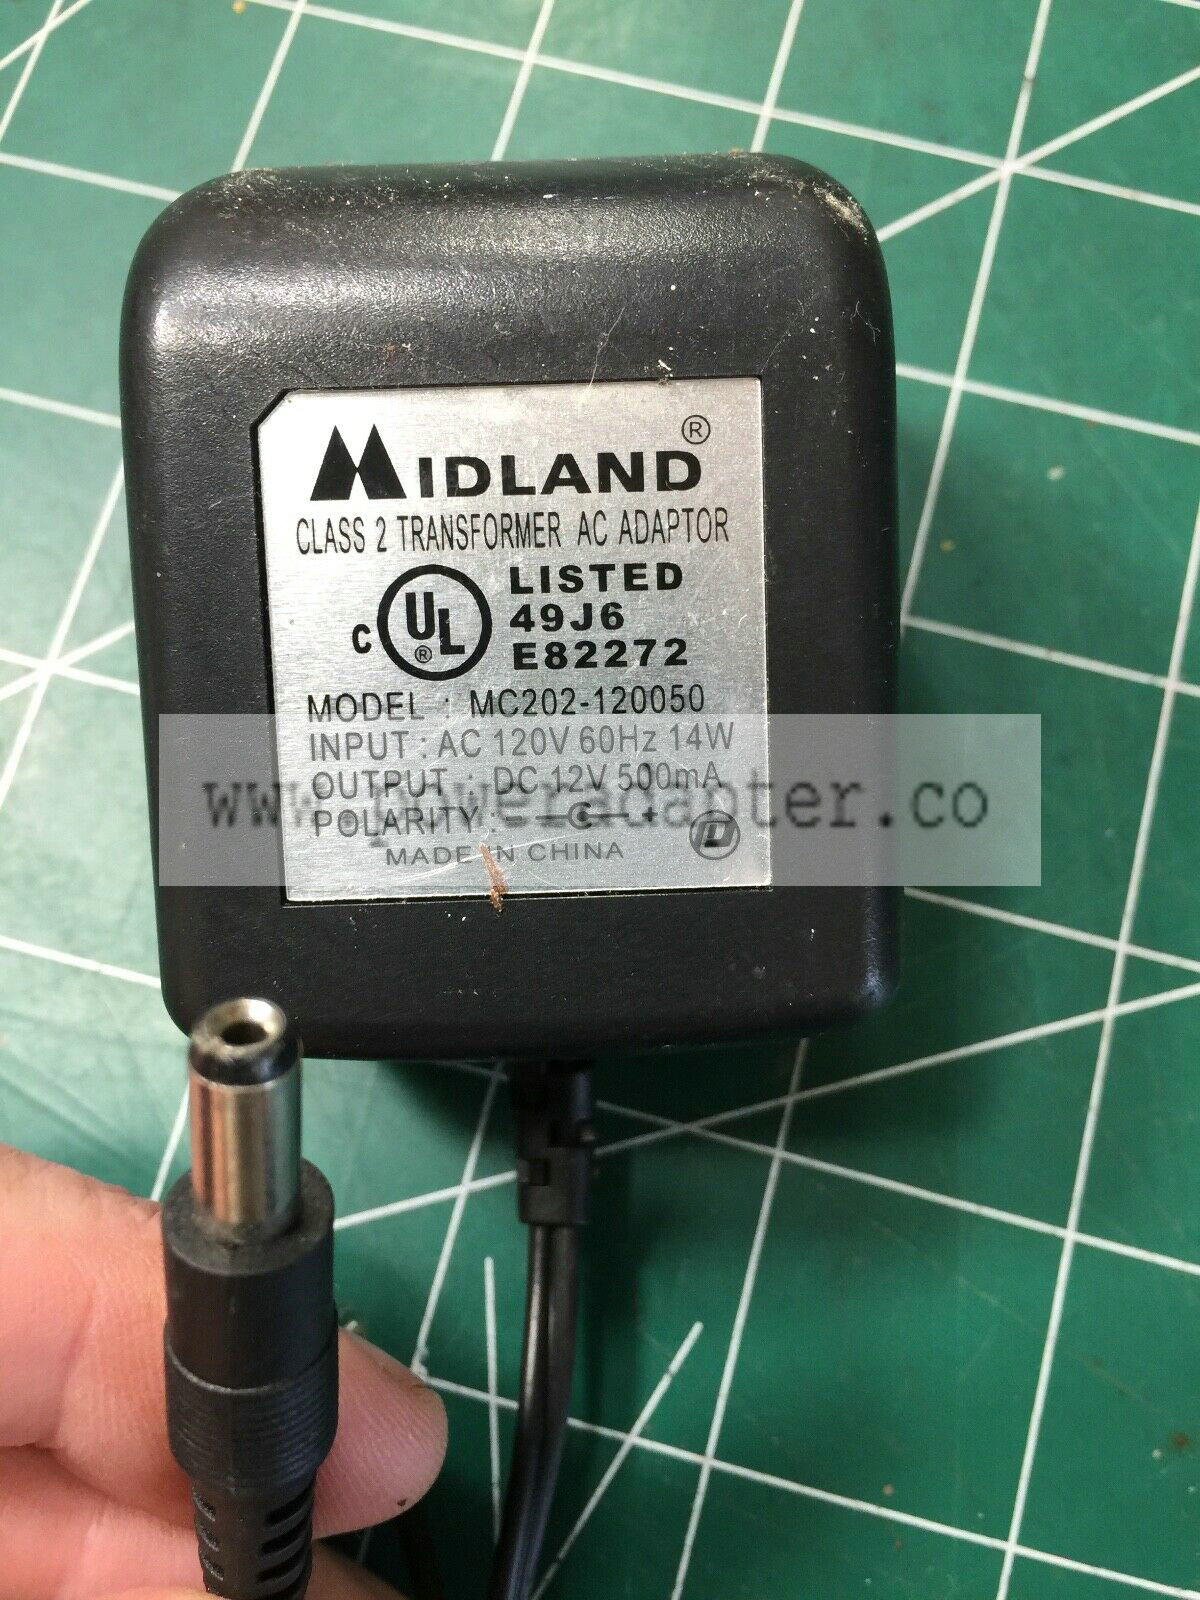 MIDLAND 12V, 500mA AC/DC WALL WART POWER SUPPLY ADAPTER CORD MODEL#MC202-120050 power supply we inspected to ensure